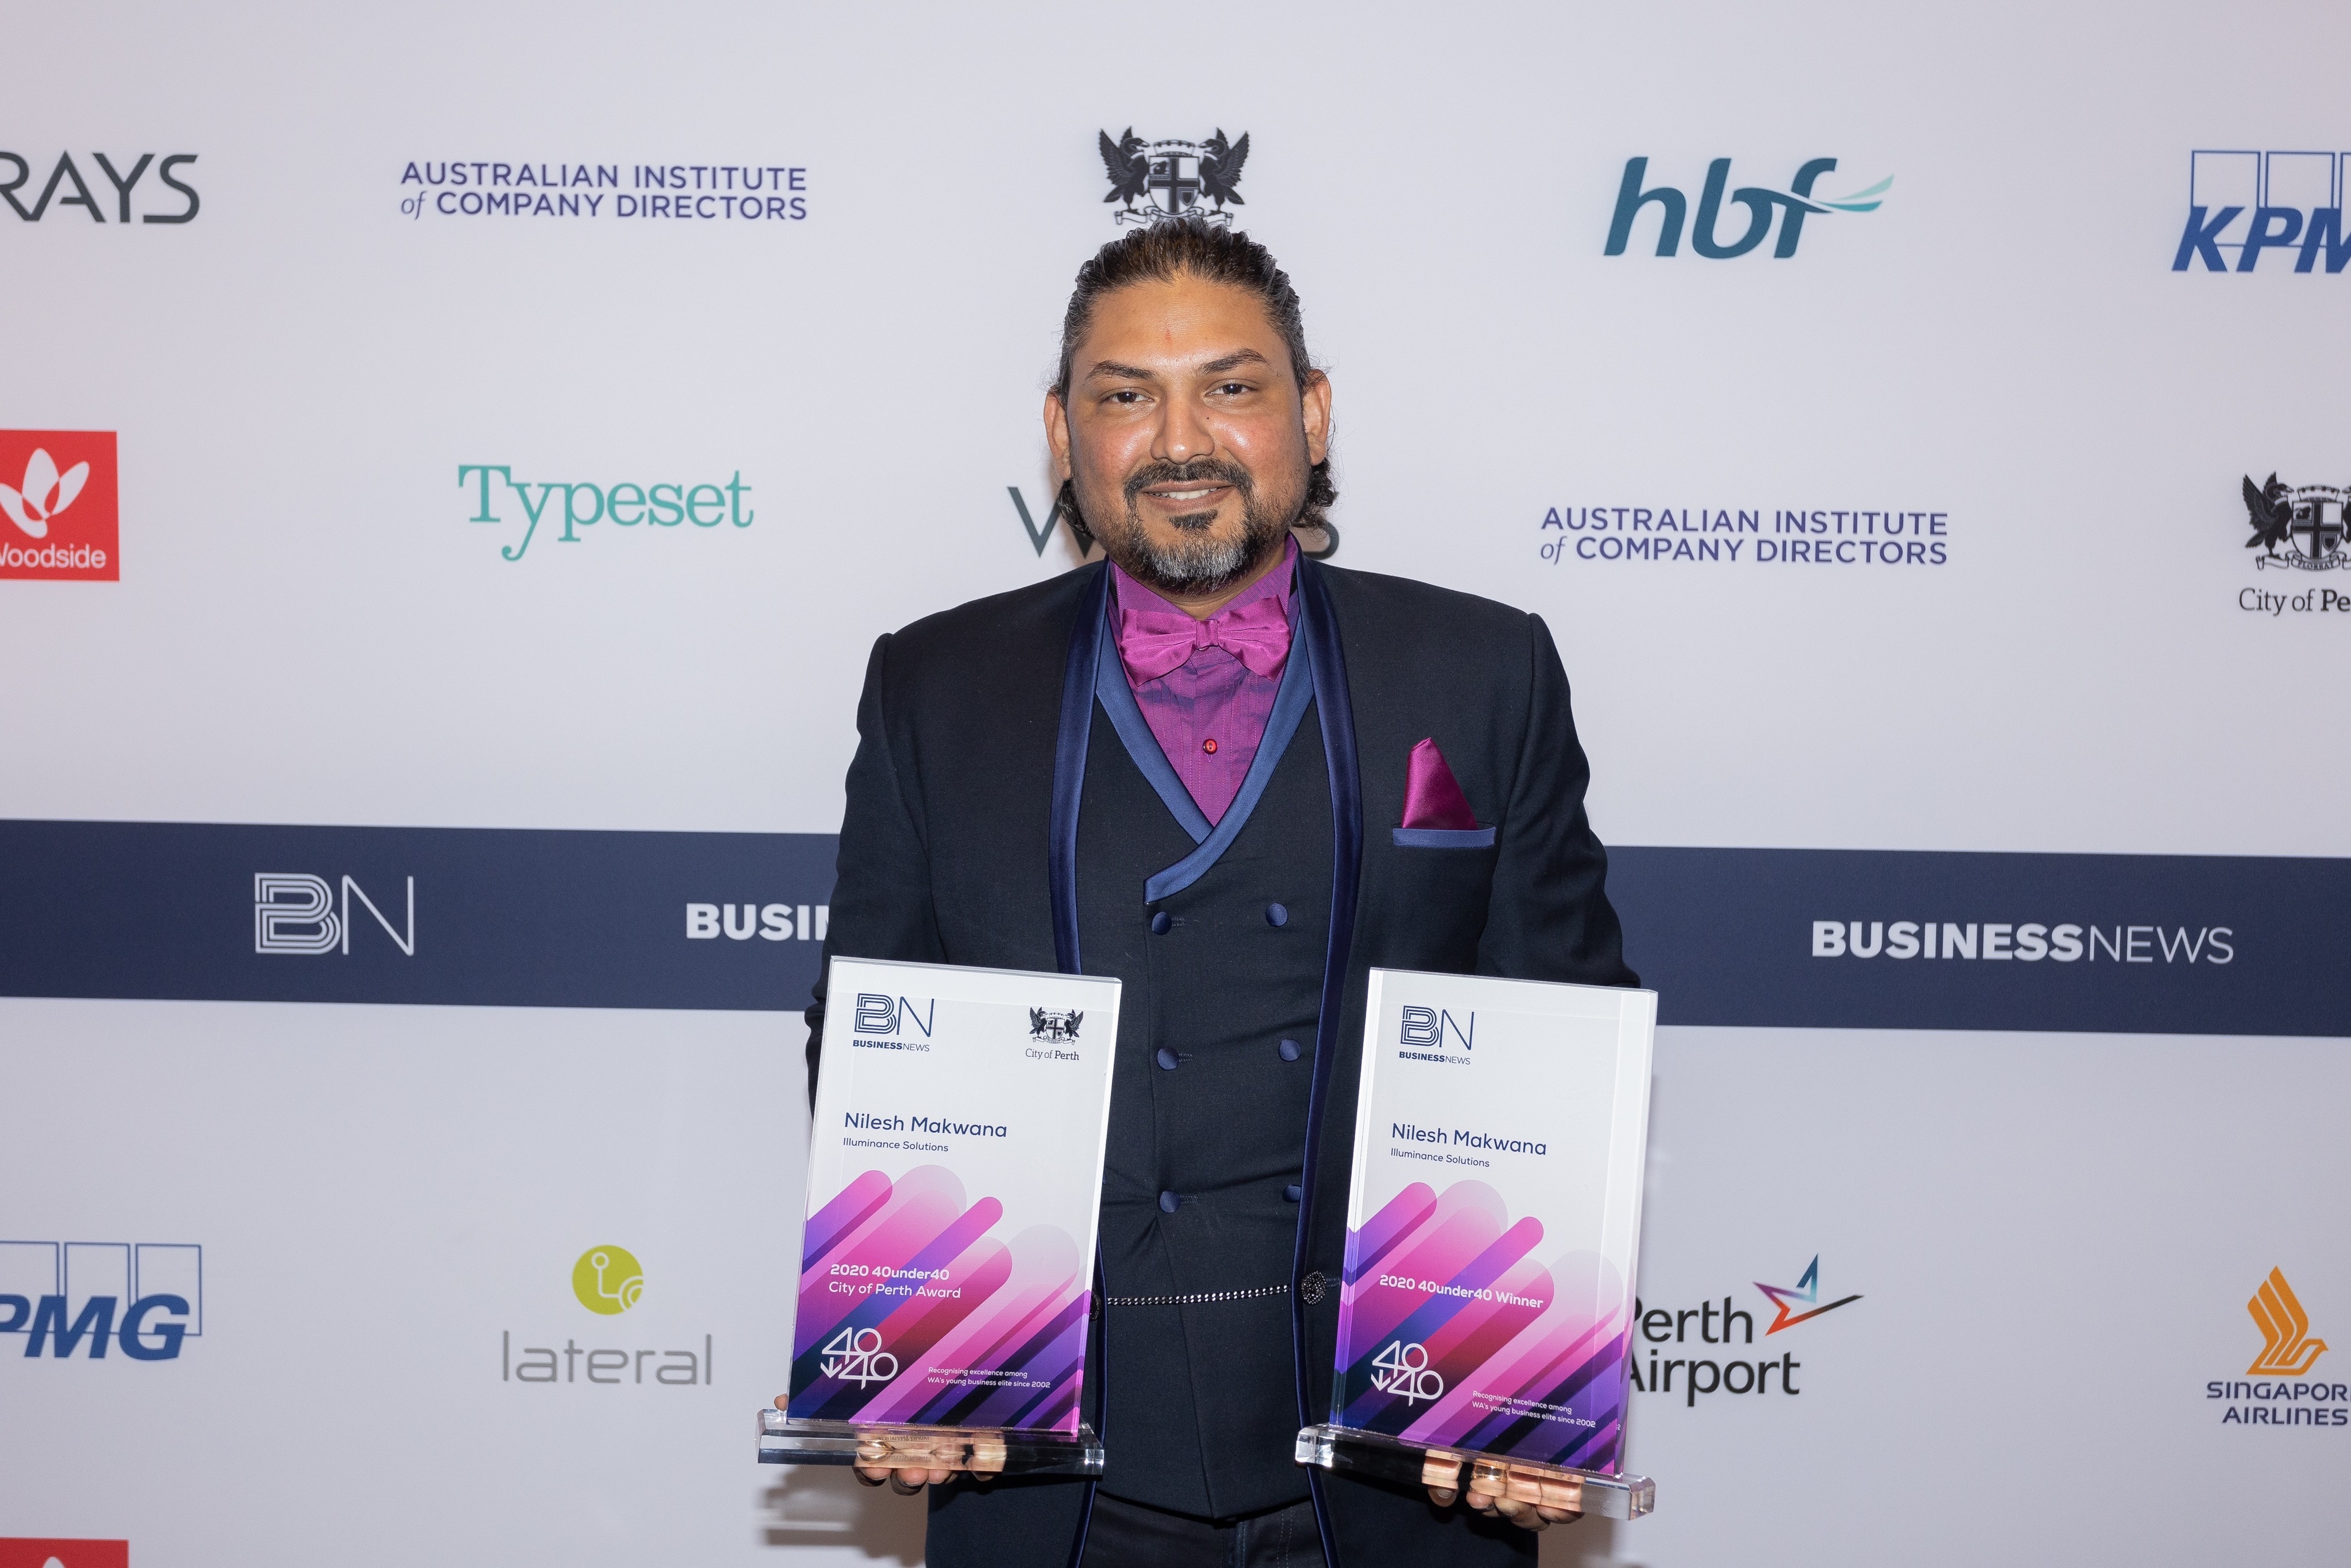 Nilesh Makwana wins top City of Perth Award - first Indian origin and only candidate to receive this recognition with two awards.